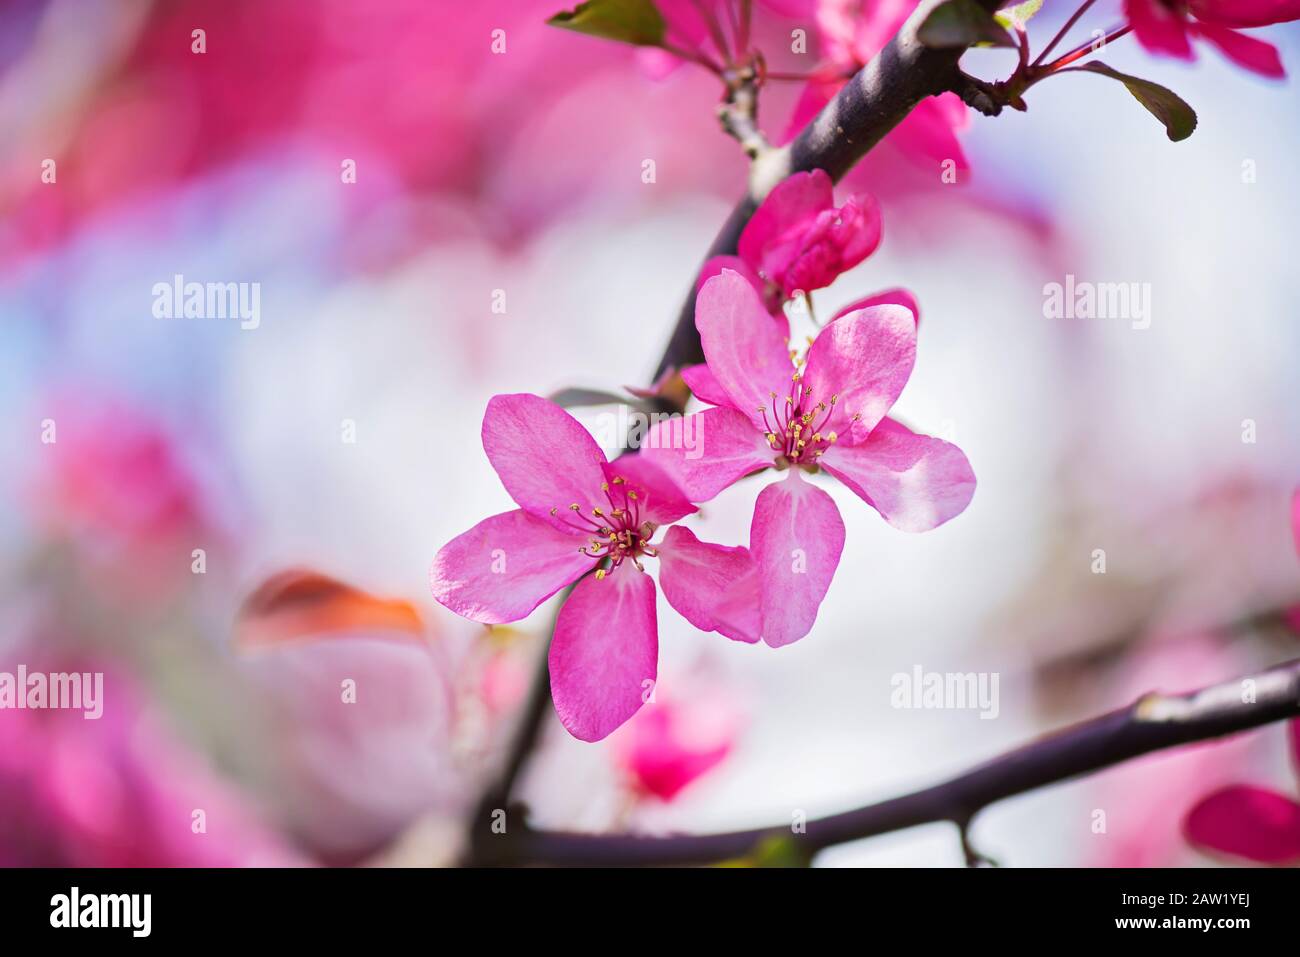 Pink flowers on the bush. Shallow depth of field. Stock Photo